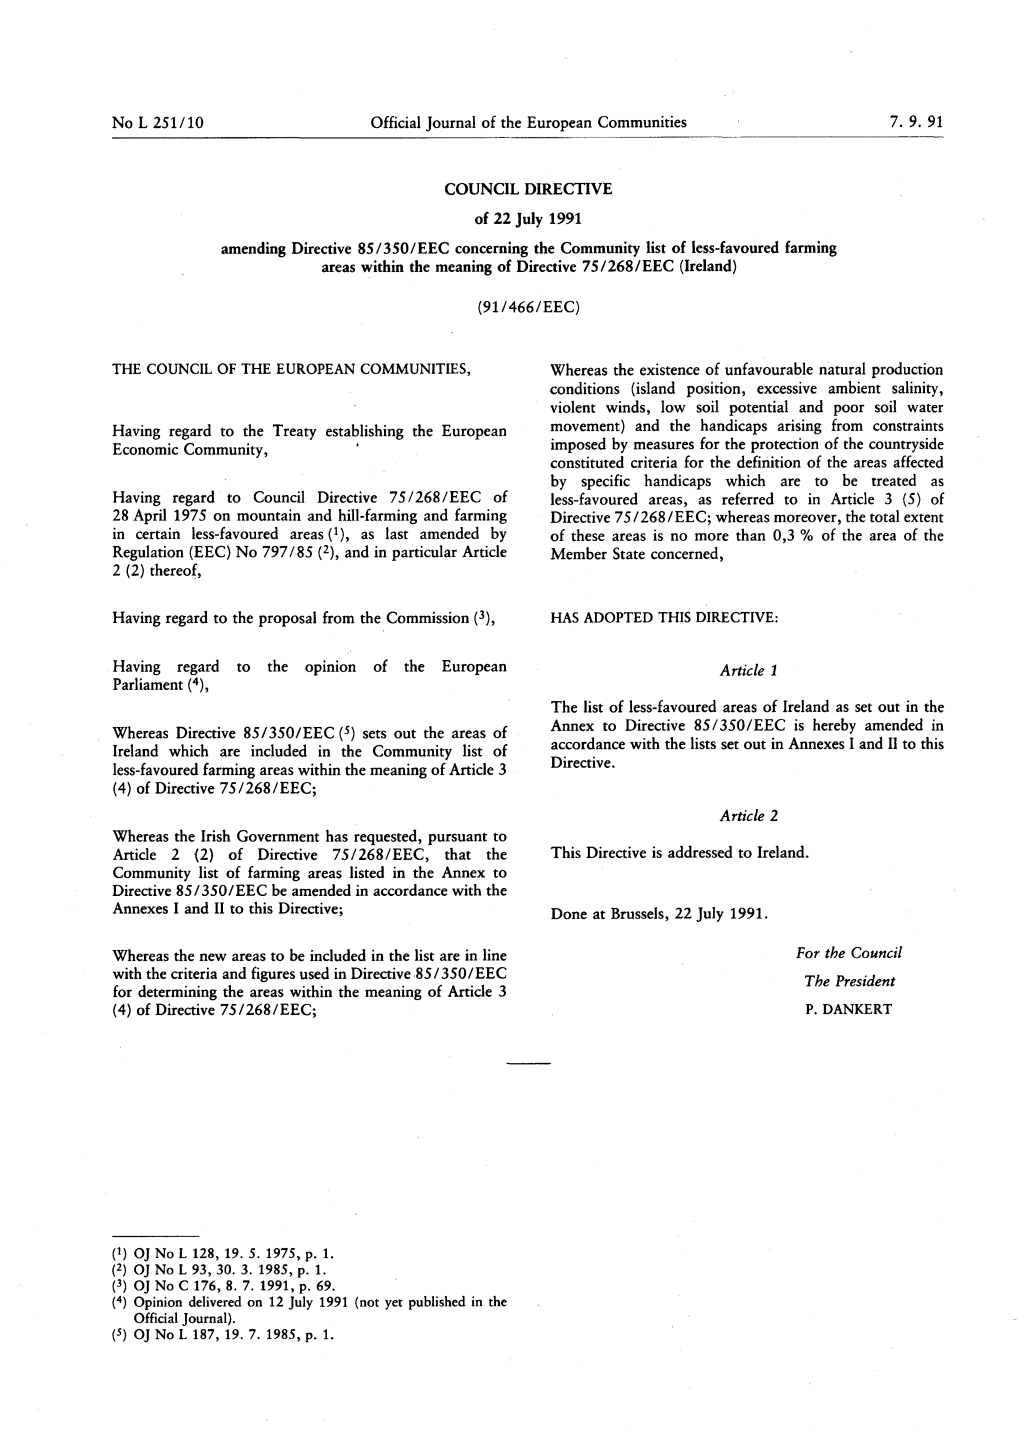 Amending Directive 85/350/EEC Concerning the Community List Of